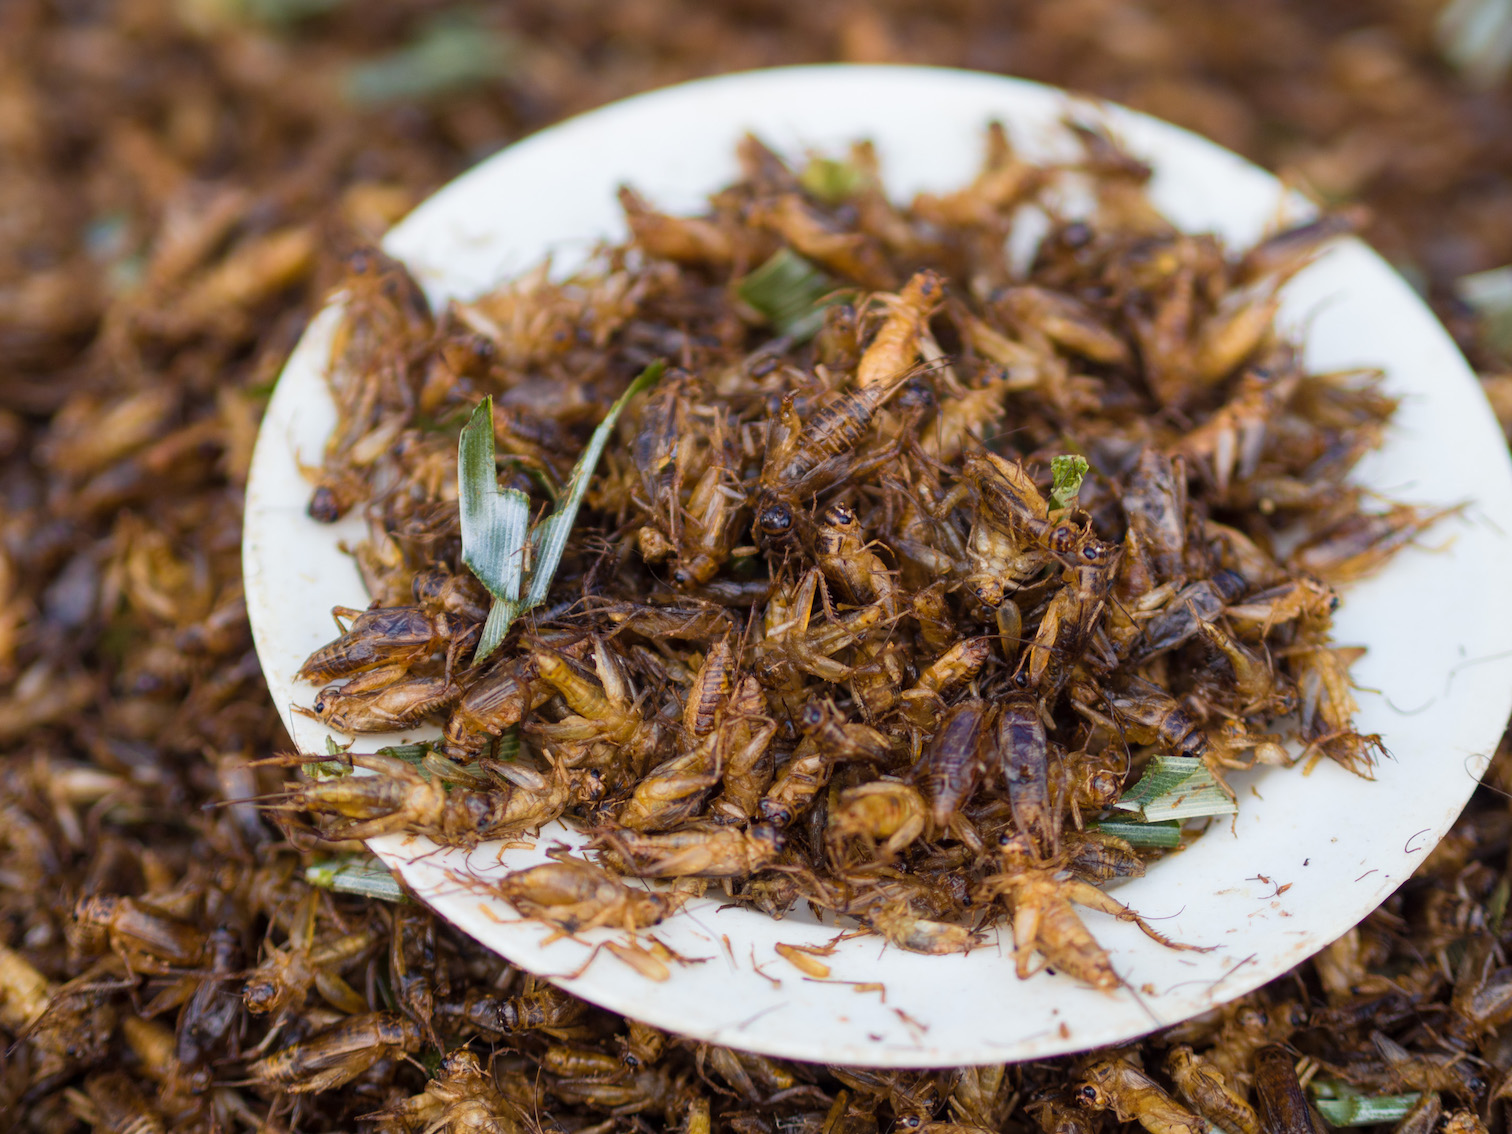 Footage of cricket farm in Canada highlights globalist push to replace beef with bugs